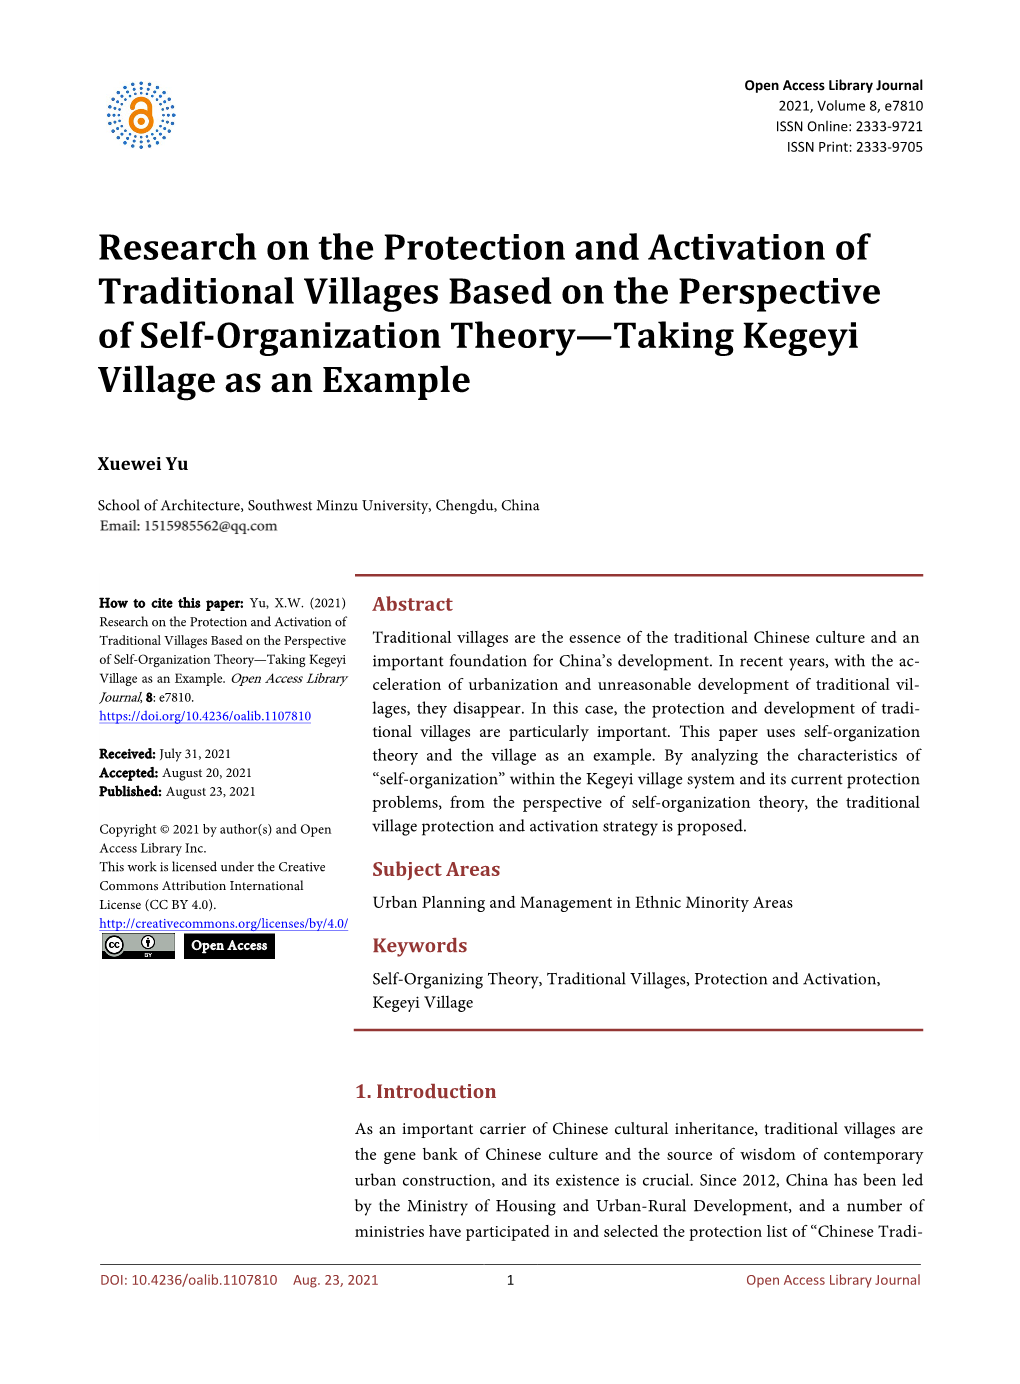 Research on the Protection and Activation of Traditional Villages Based on the Perspective of Self-Organization Theory—Taking Kegeyi Village As an Example